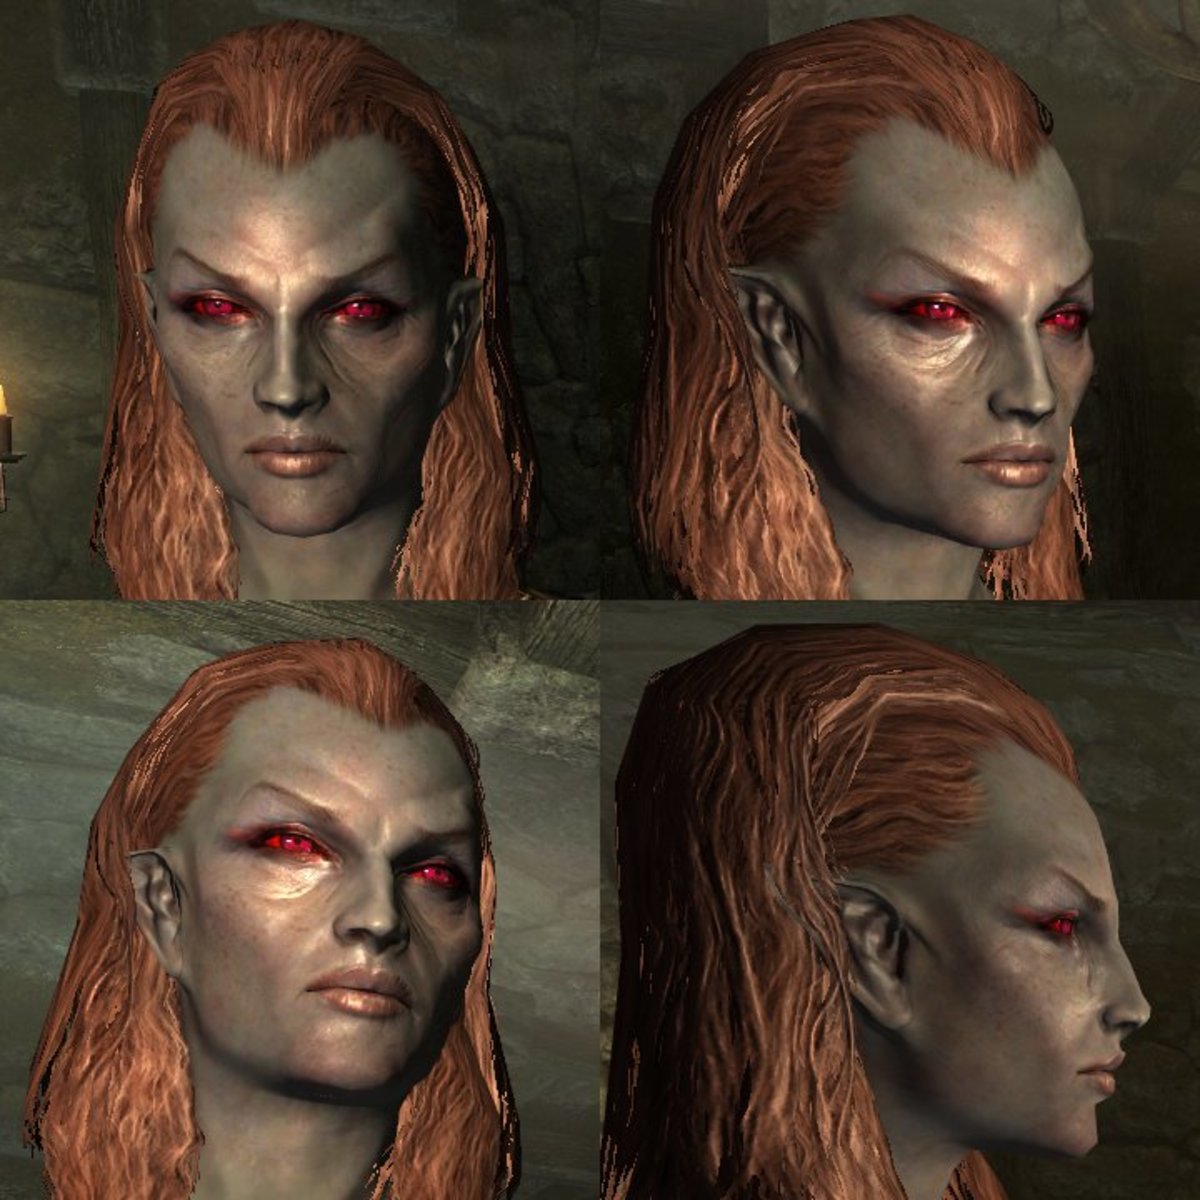 skyrim mods to make characters look better